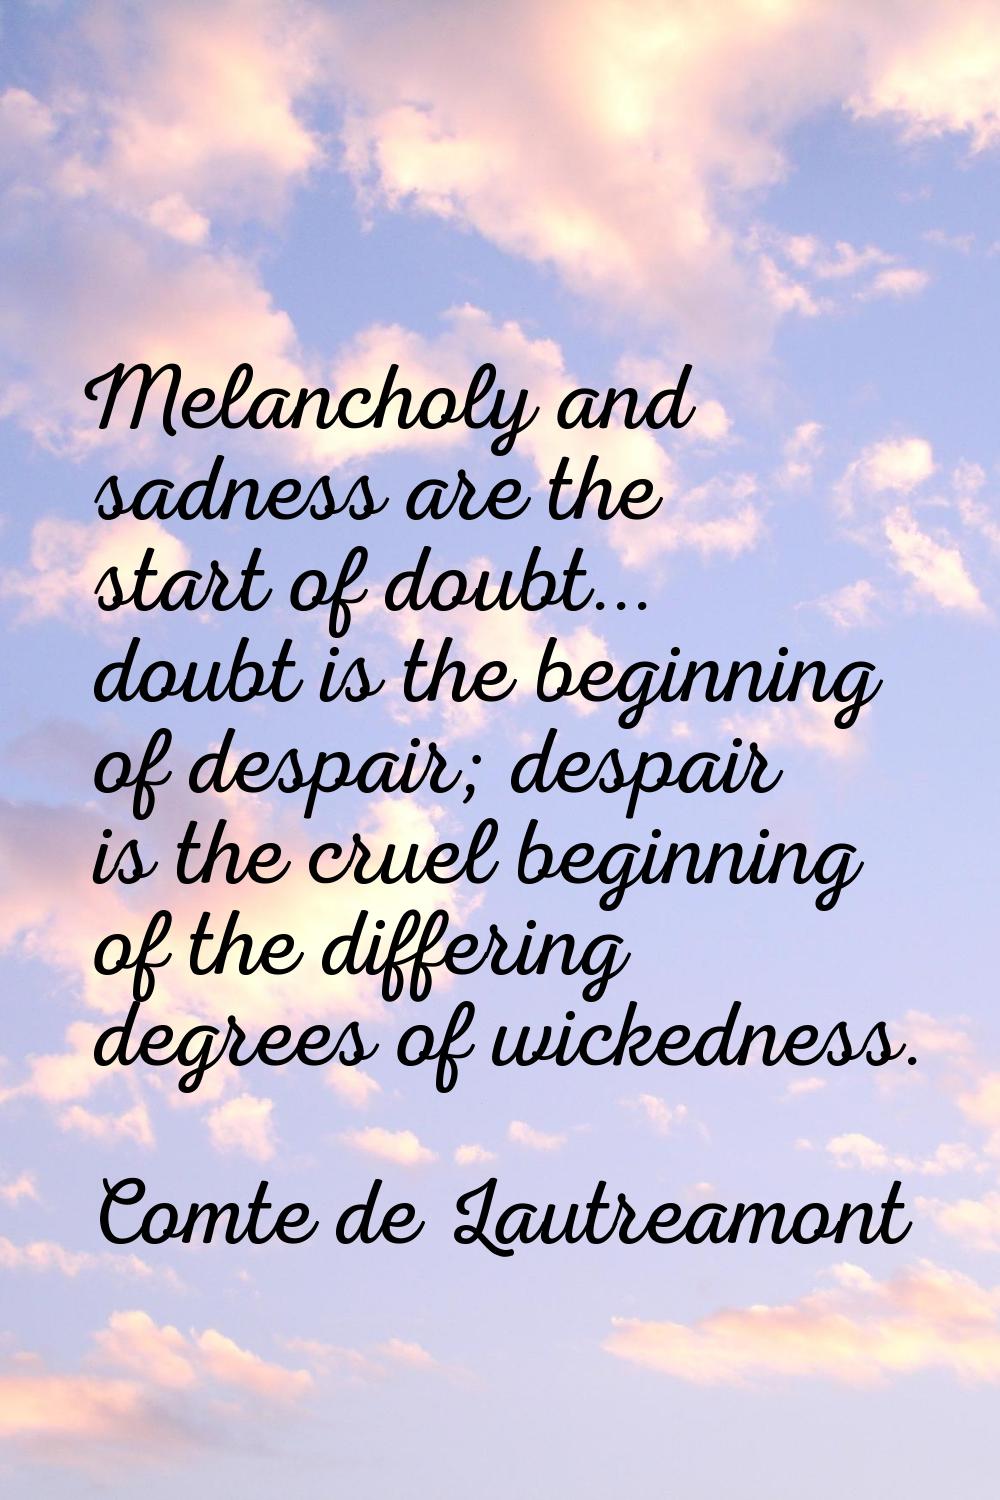 Melancholy and sadness are the start of doubt... doubt is the beginning of despair; despair is the 